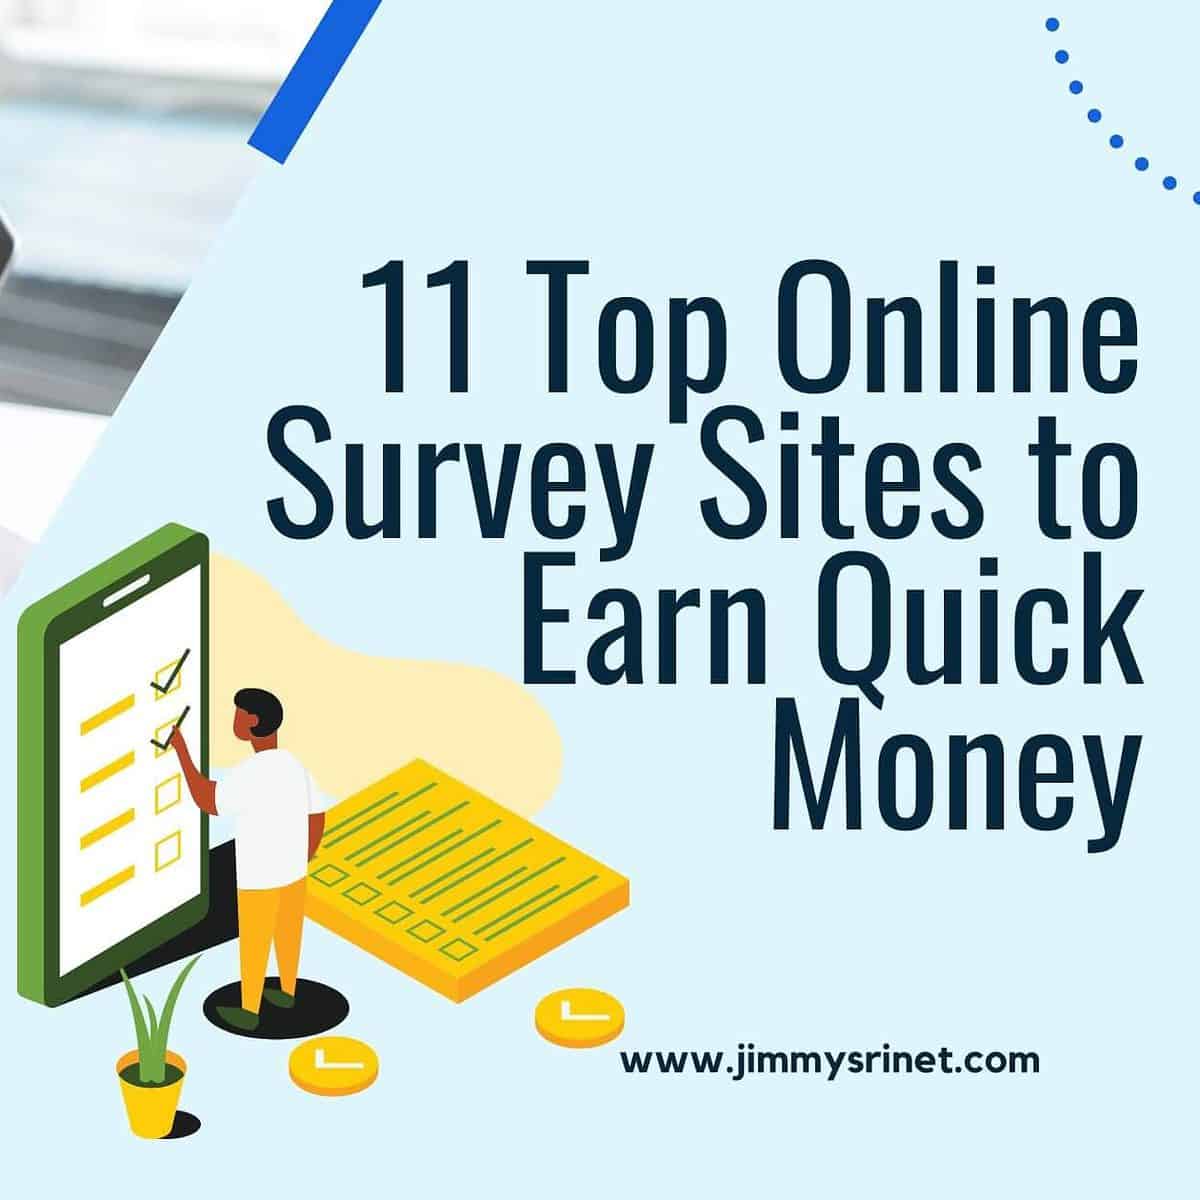 You are currently viewing 11 Top Online Survey Sites to Earn Quick Money